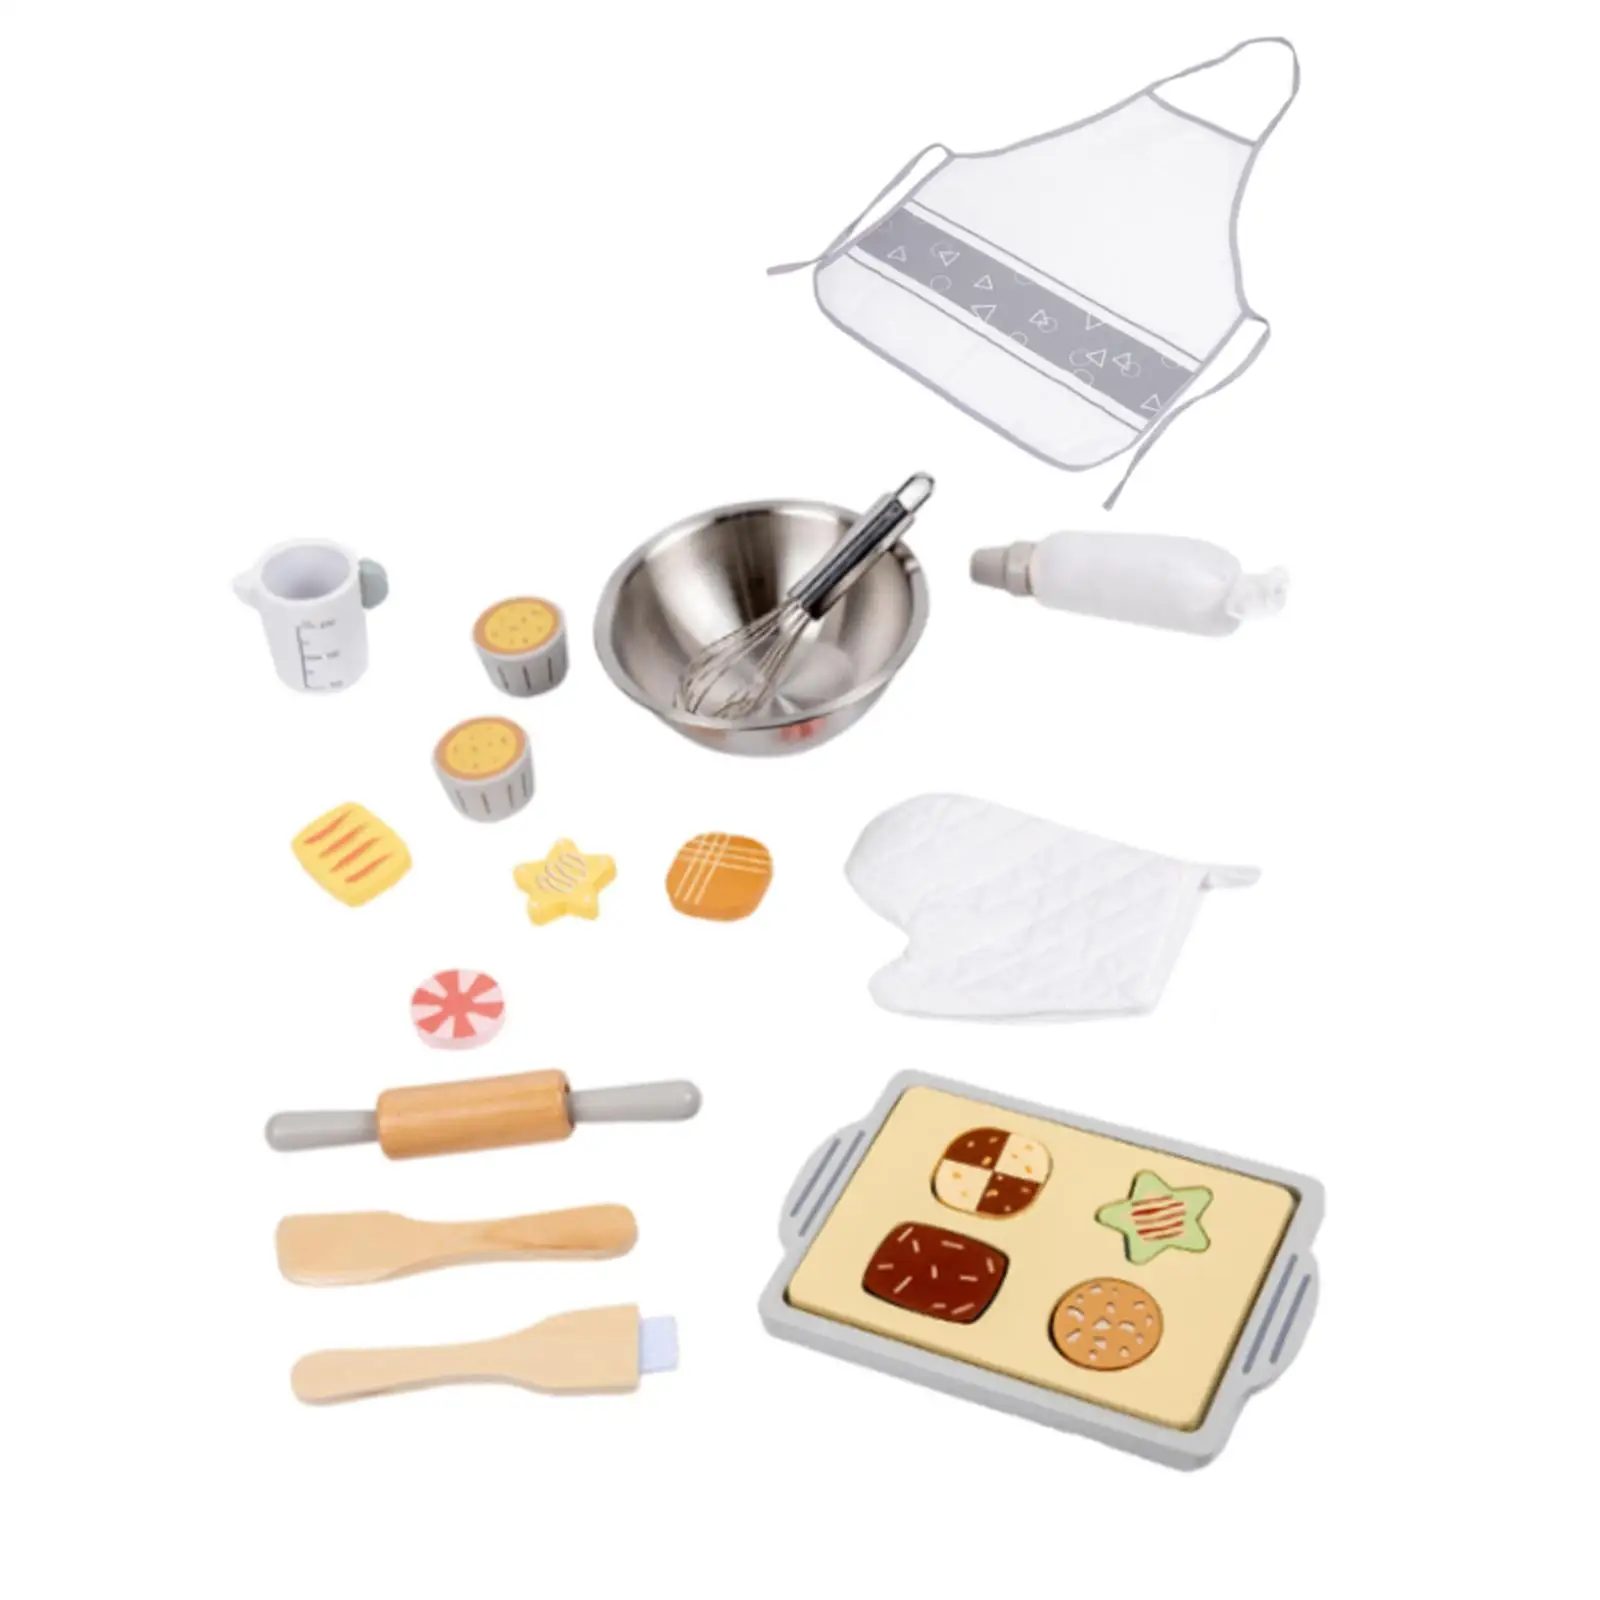 

Kitchen Baking Pretend Toy Hands on Abilities Cookies and Pastry Toy